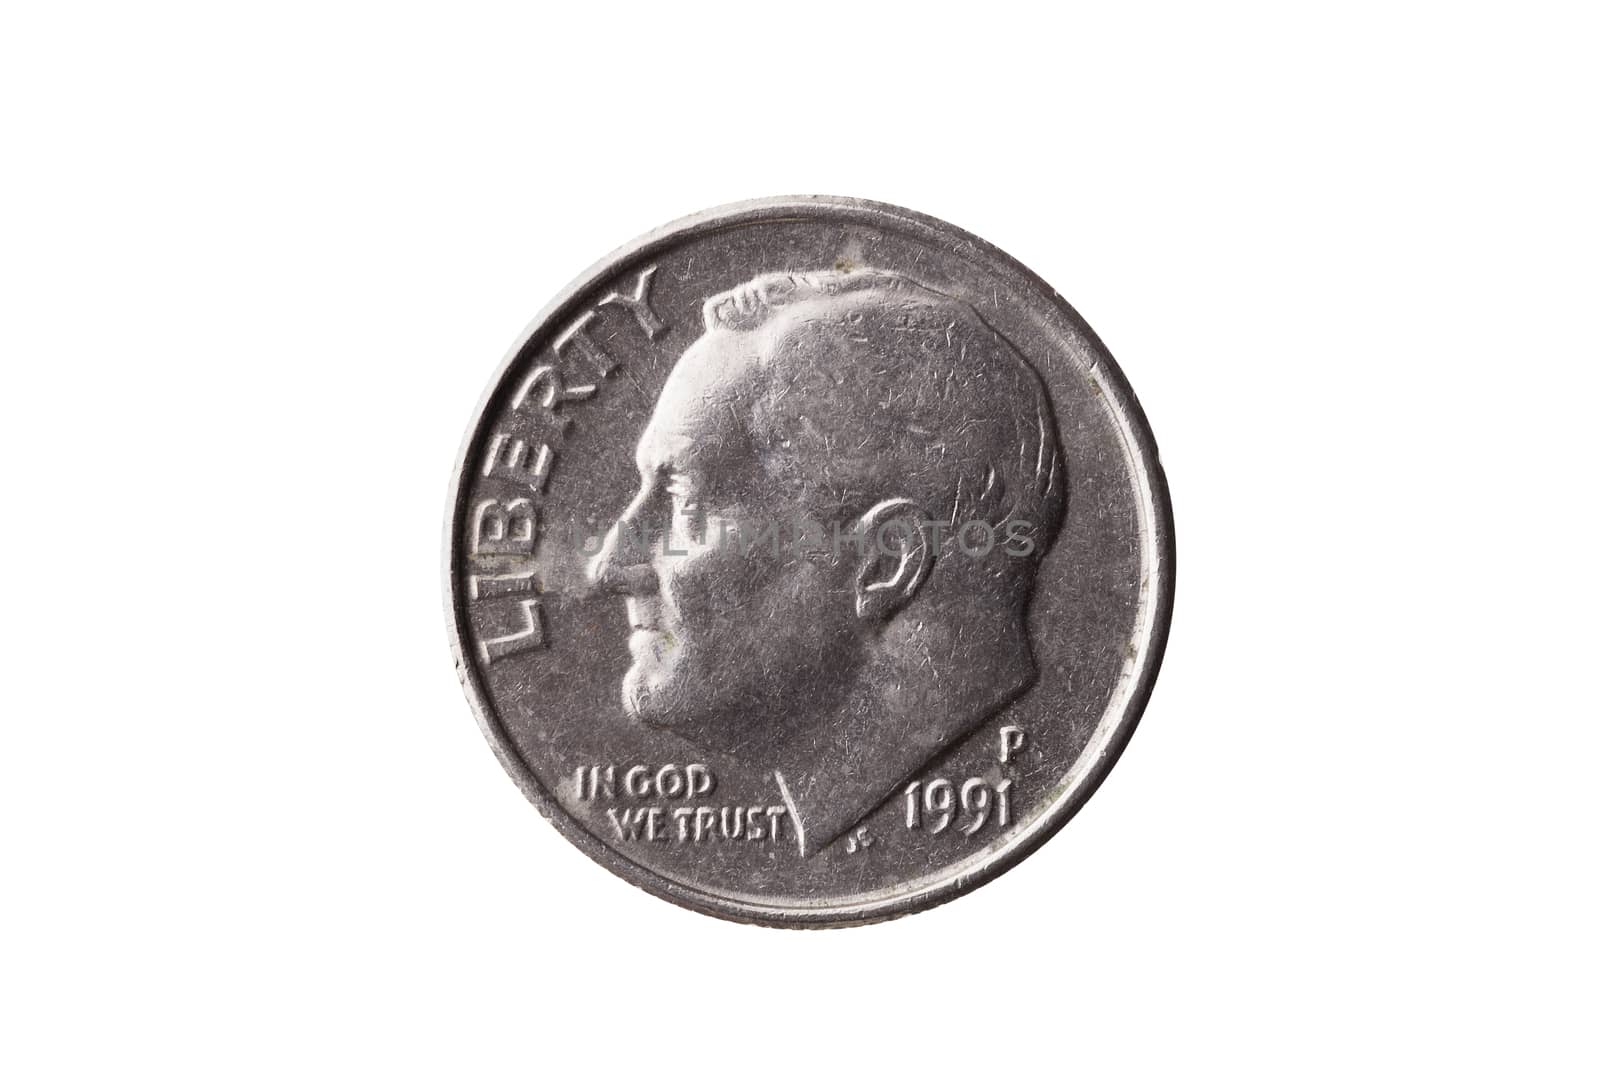 USA dime nickel coin (10 cents) with a portrait image of Frankli by ant